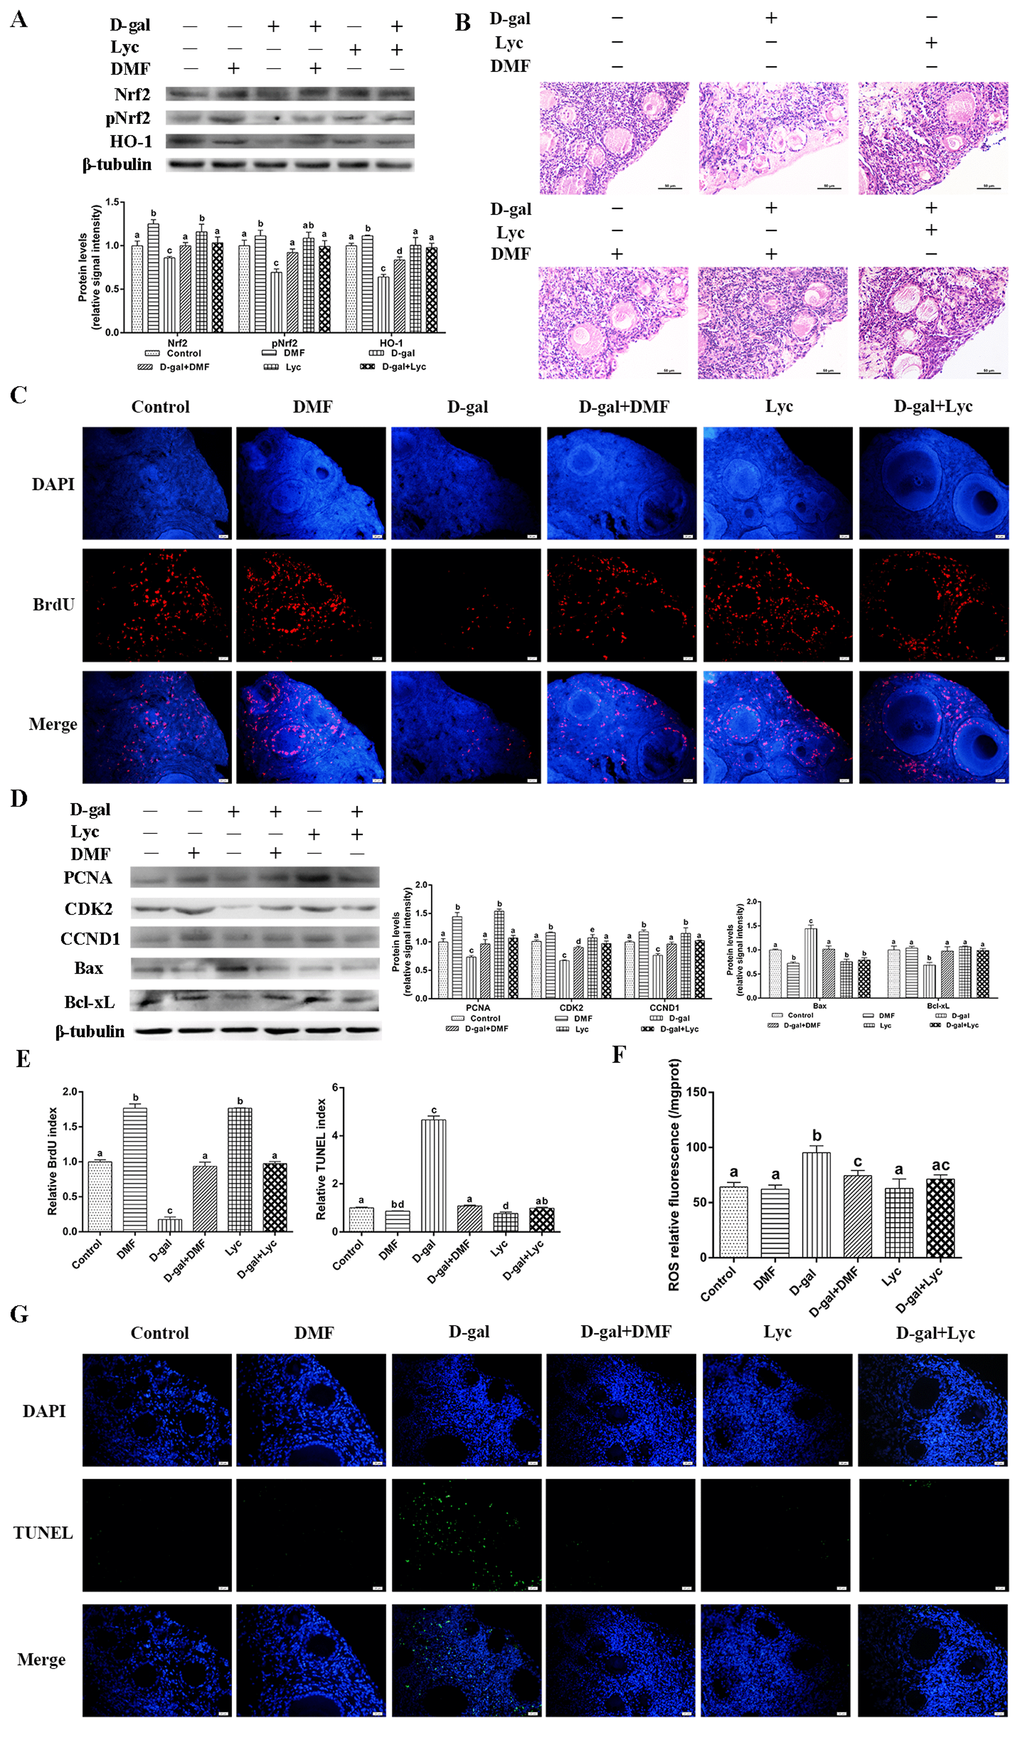 Protective effect of lycopene on oxidative stress in aged ovarian tissues was similar to the effects of DMF. (A) Relative changes in the expression of Nrf2, pNrf2 and HO-1 after treatment with D-gal alone or combined with DMF or lycopene. (B) Changes in the morphology of ovarian tissues after treatment with D-gal alone or combined with DMF or lycopene, scale bar: 50 µm. (C and E) Changes in BrdU index in ovarian tissues after treatment with D-gal alone or combined with DMF or lycopene, scale bar: 20 µm. (D) Relative changes in the expression of proteins related to cell proliferation and cell apoptosis in ovarian tissues after treatment with D-gal alone or combined with DMF or lycopene. (E and G) Changes in TUNEL index in ovarian tissues after treatment with D-gal alone or combined with DMF or lycopene, scale bar: 20 µm. (F) Changes in ROS levels of the ovarian tissues after treatment with D-gal alone or combined with DMF or lycopene. Values are expressed as the means±s.e.. Different lowercase letters indicate significant differences (P 